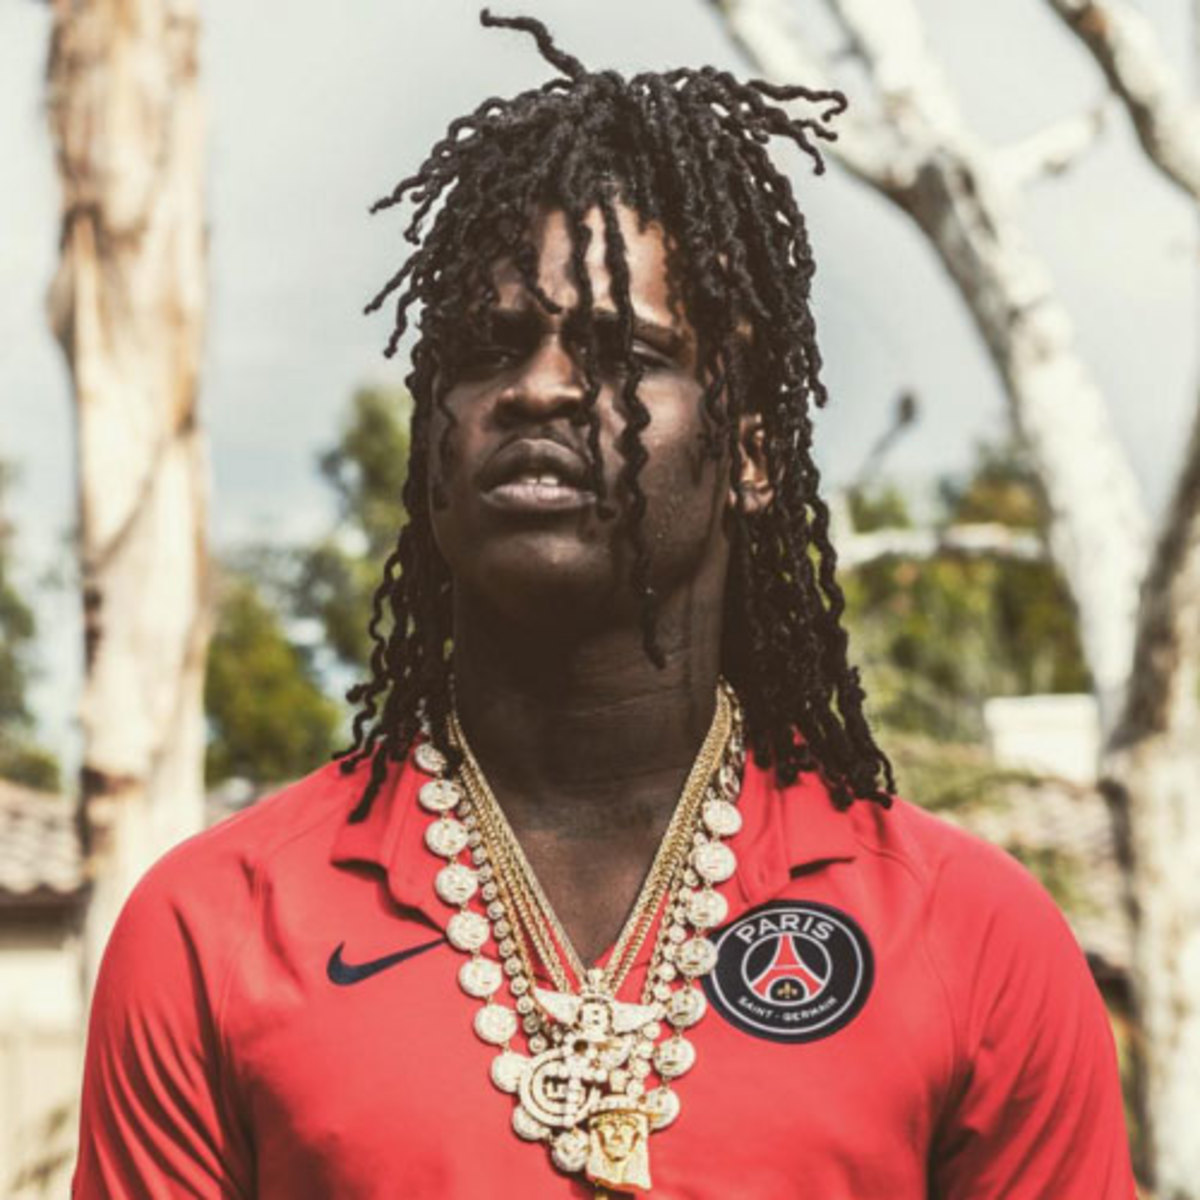 study-says-chief-keef-swears-more-per-song-than-any-rapper-ever-djbooth